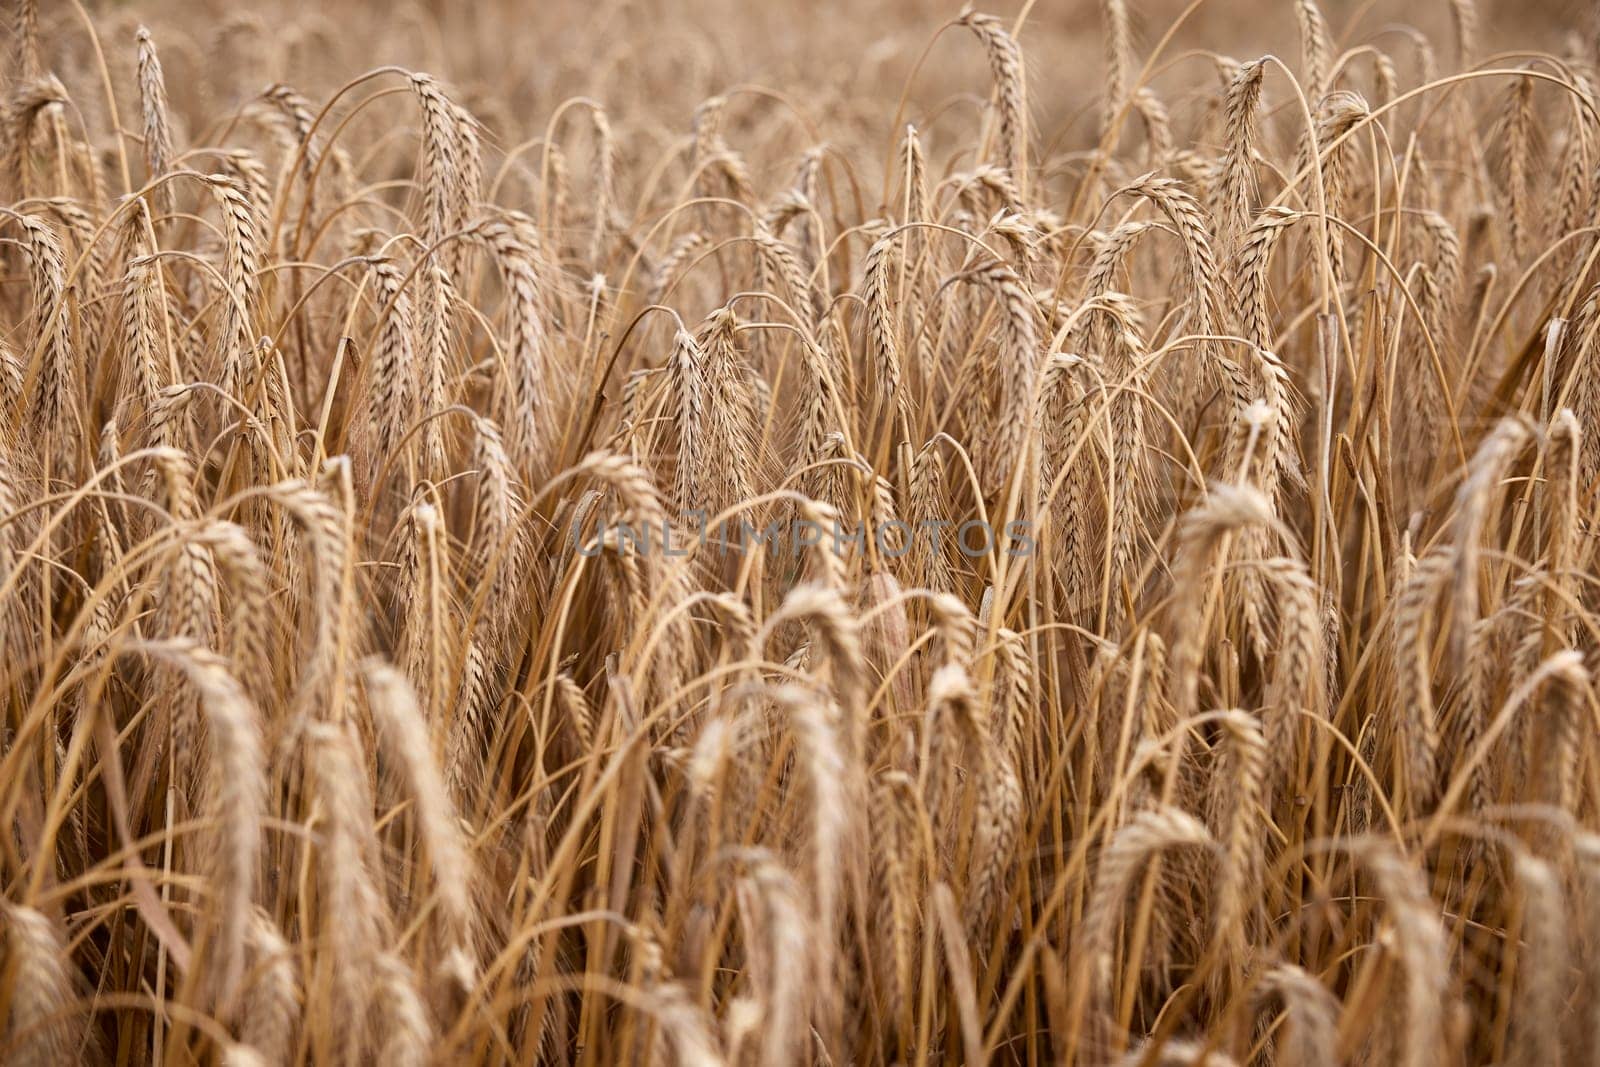 Ripe wheat, agricultural background. Golden wheat field in sunny day. Ears of wheat ripen in the field. Wheat field before harvesting, agriculture by EvgeniyQW